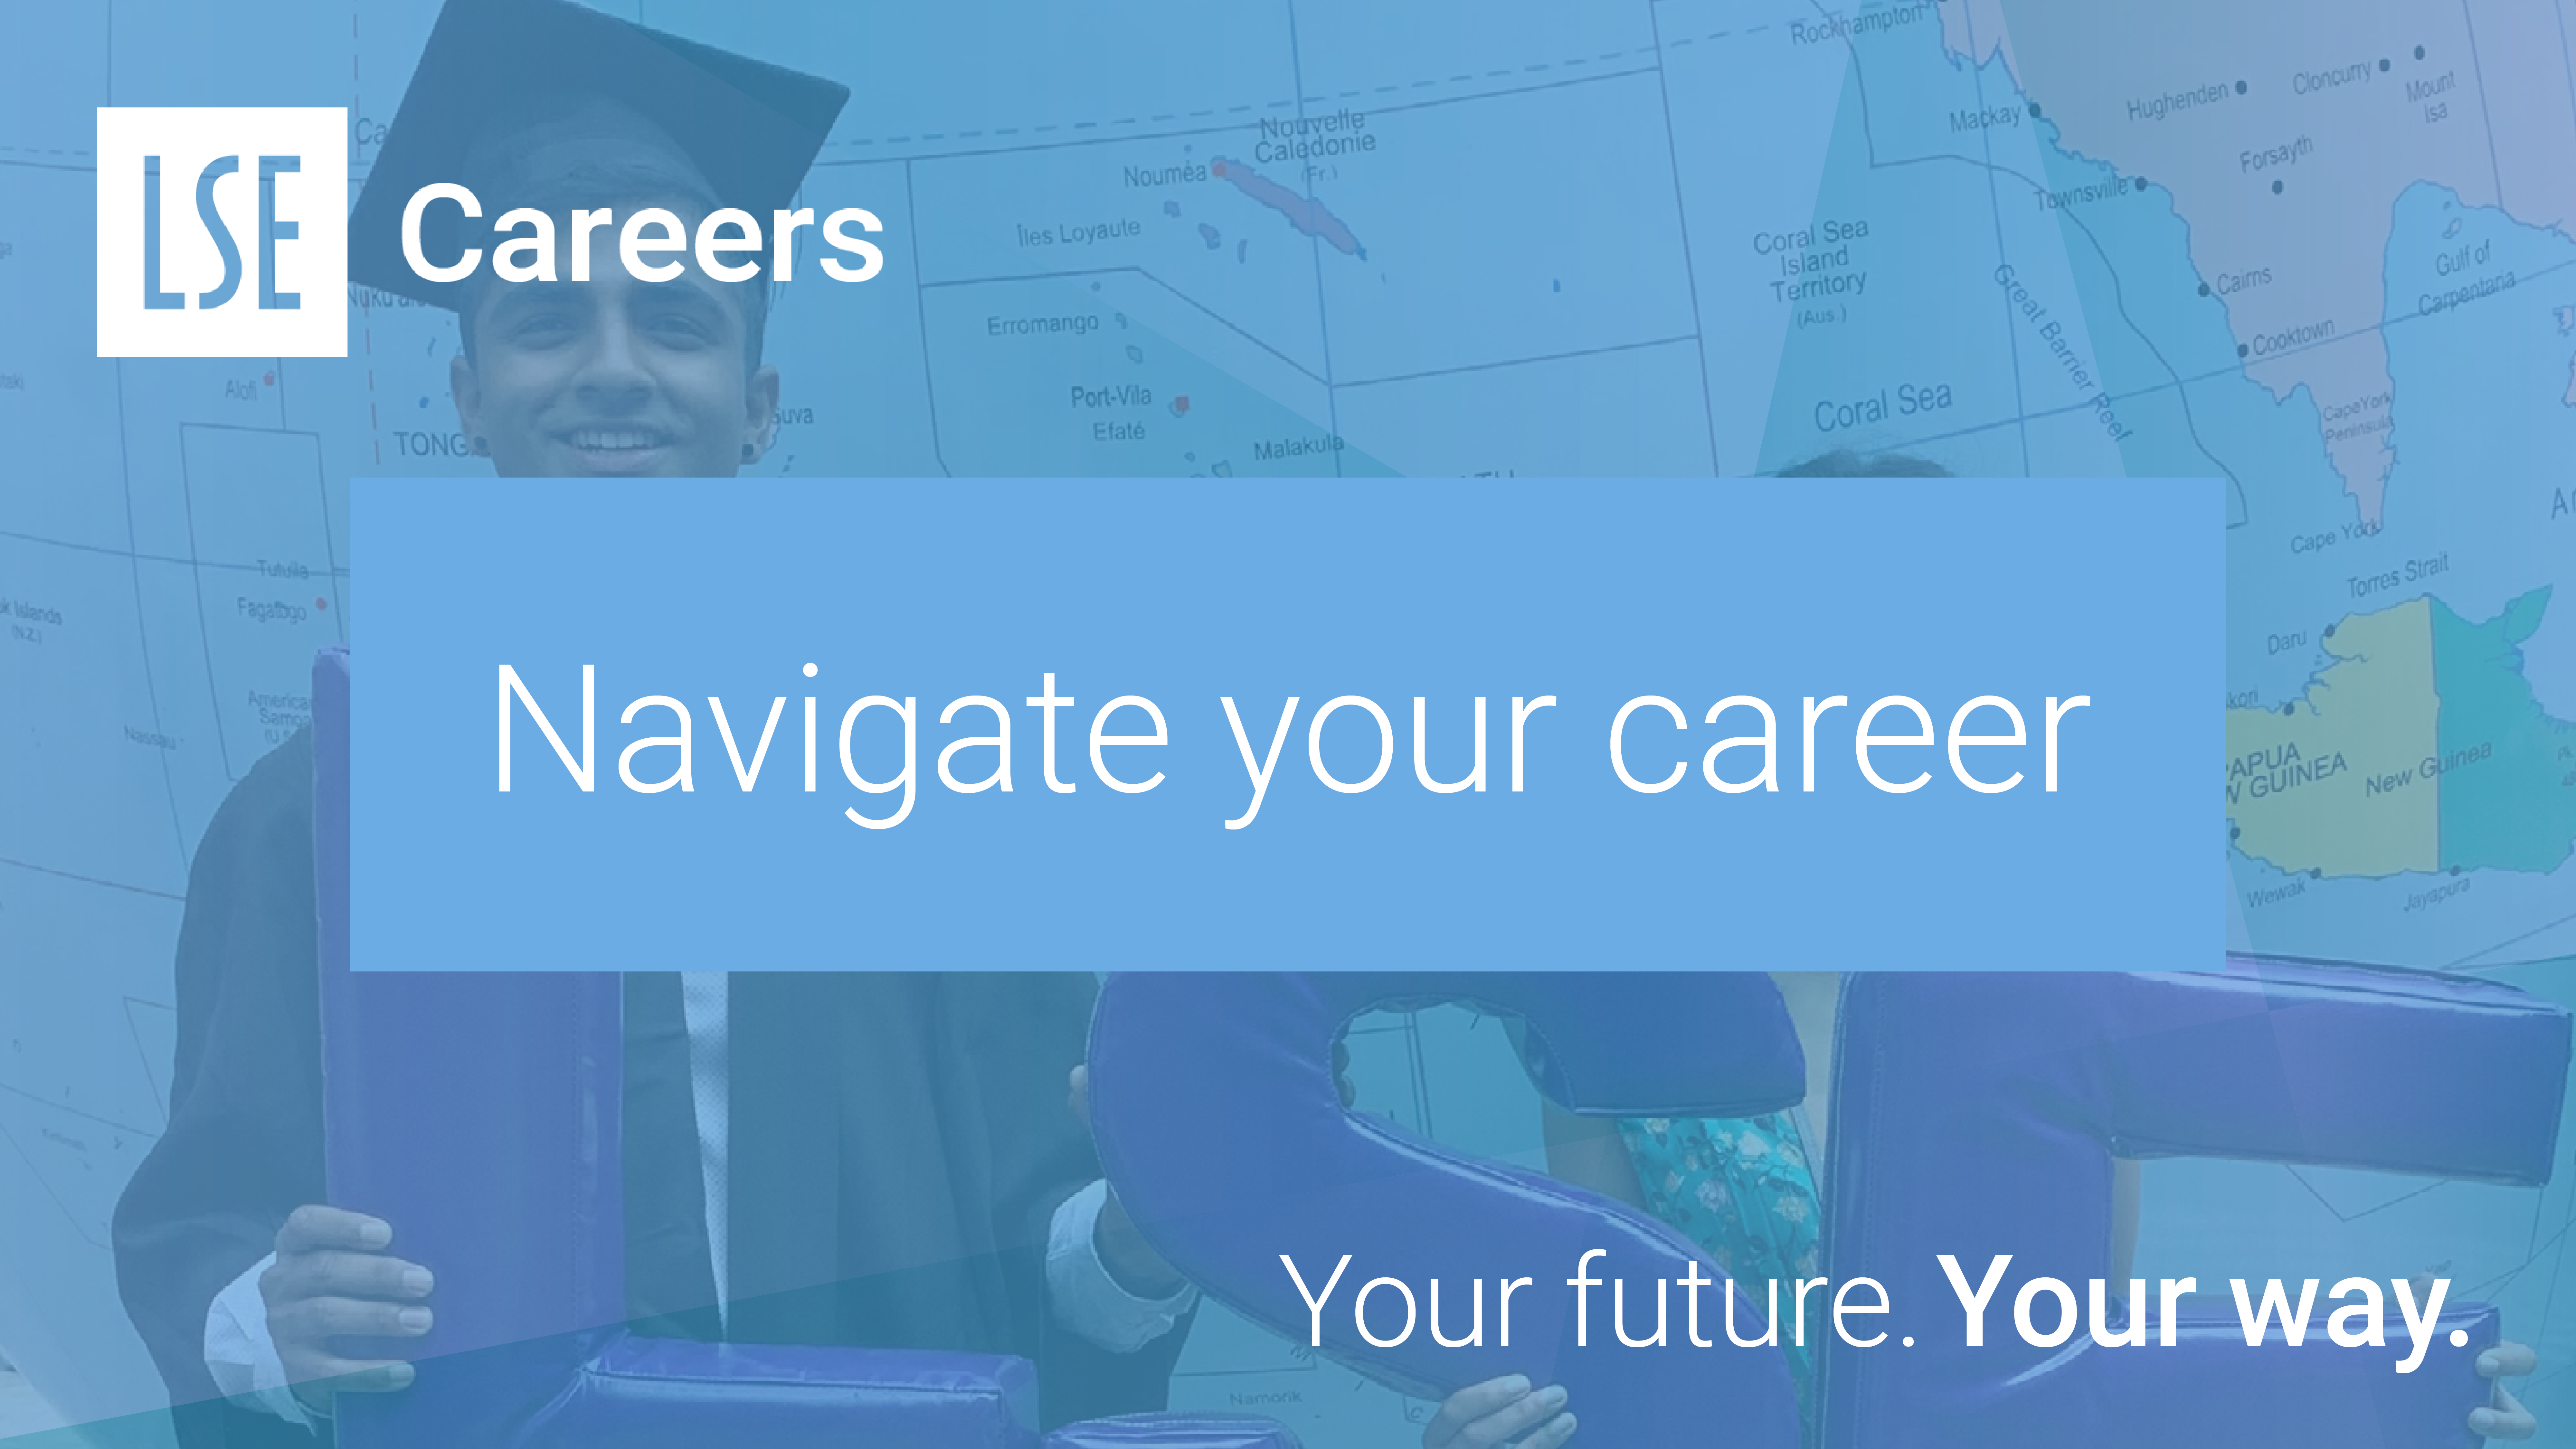 Navigate your career: Your future. Your way.